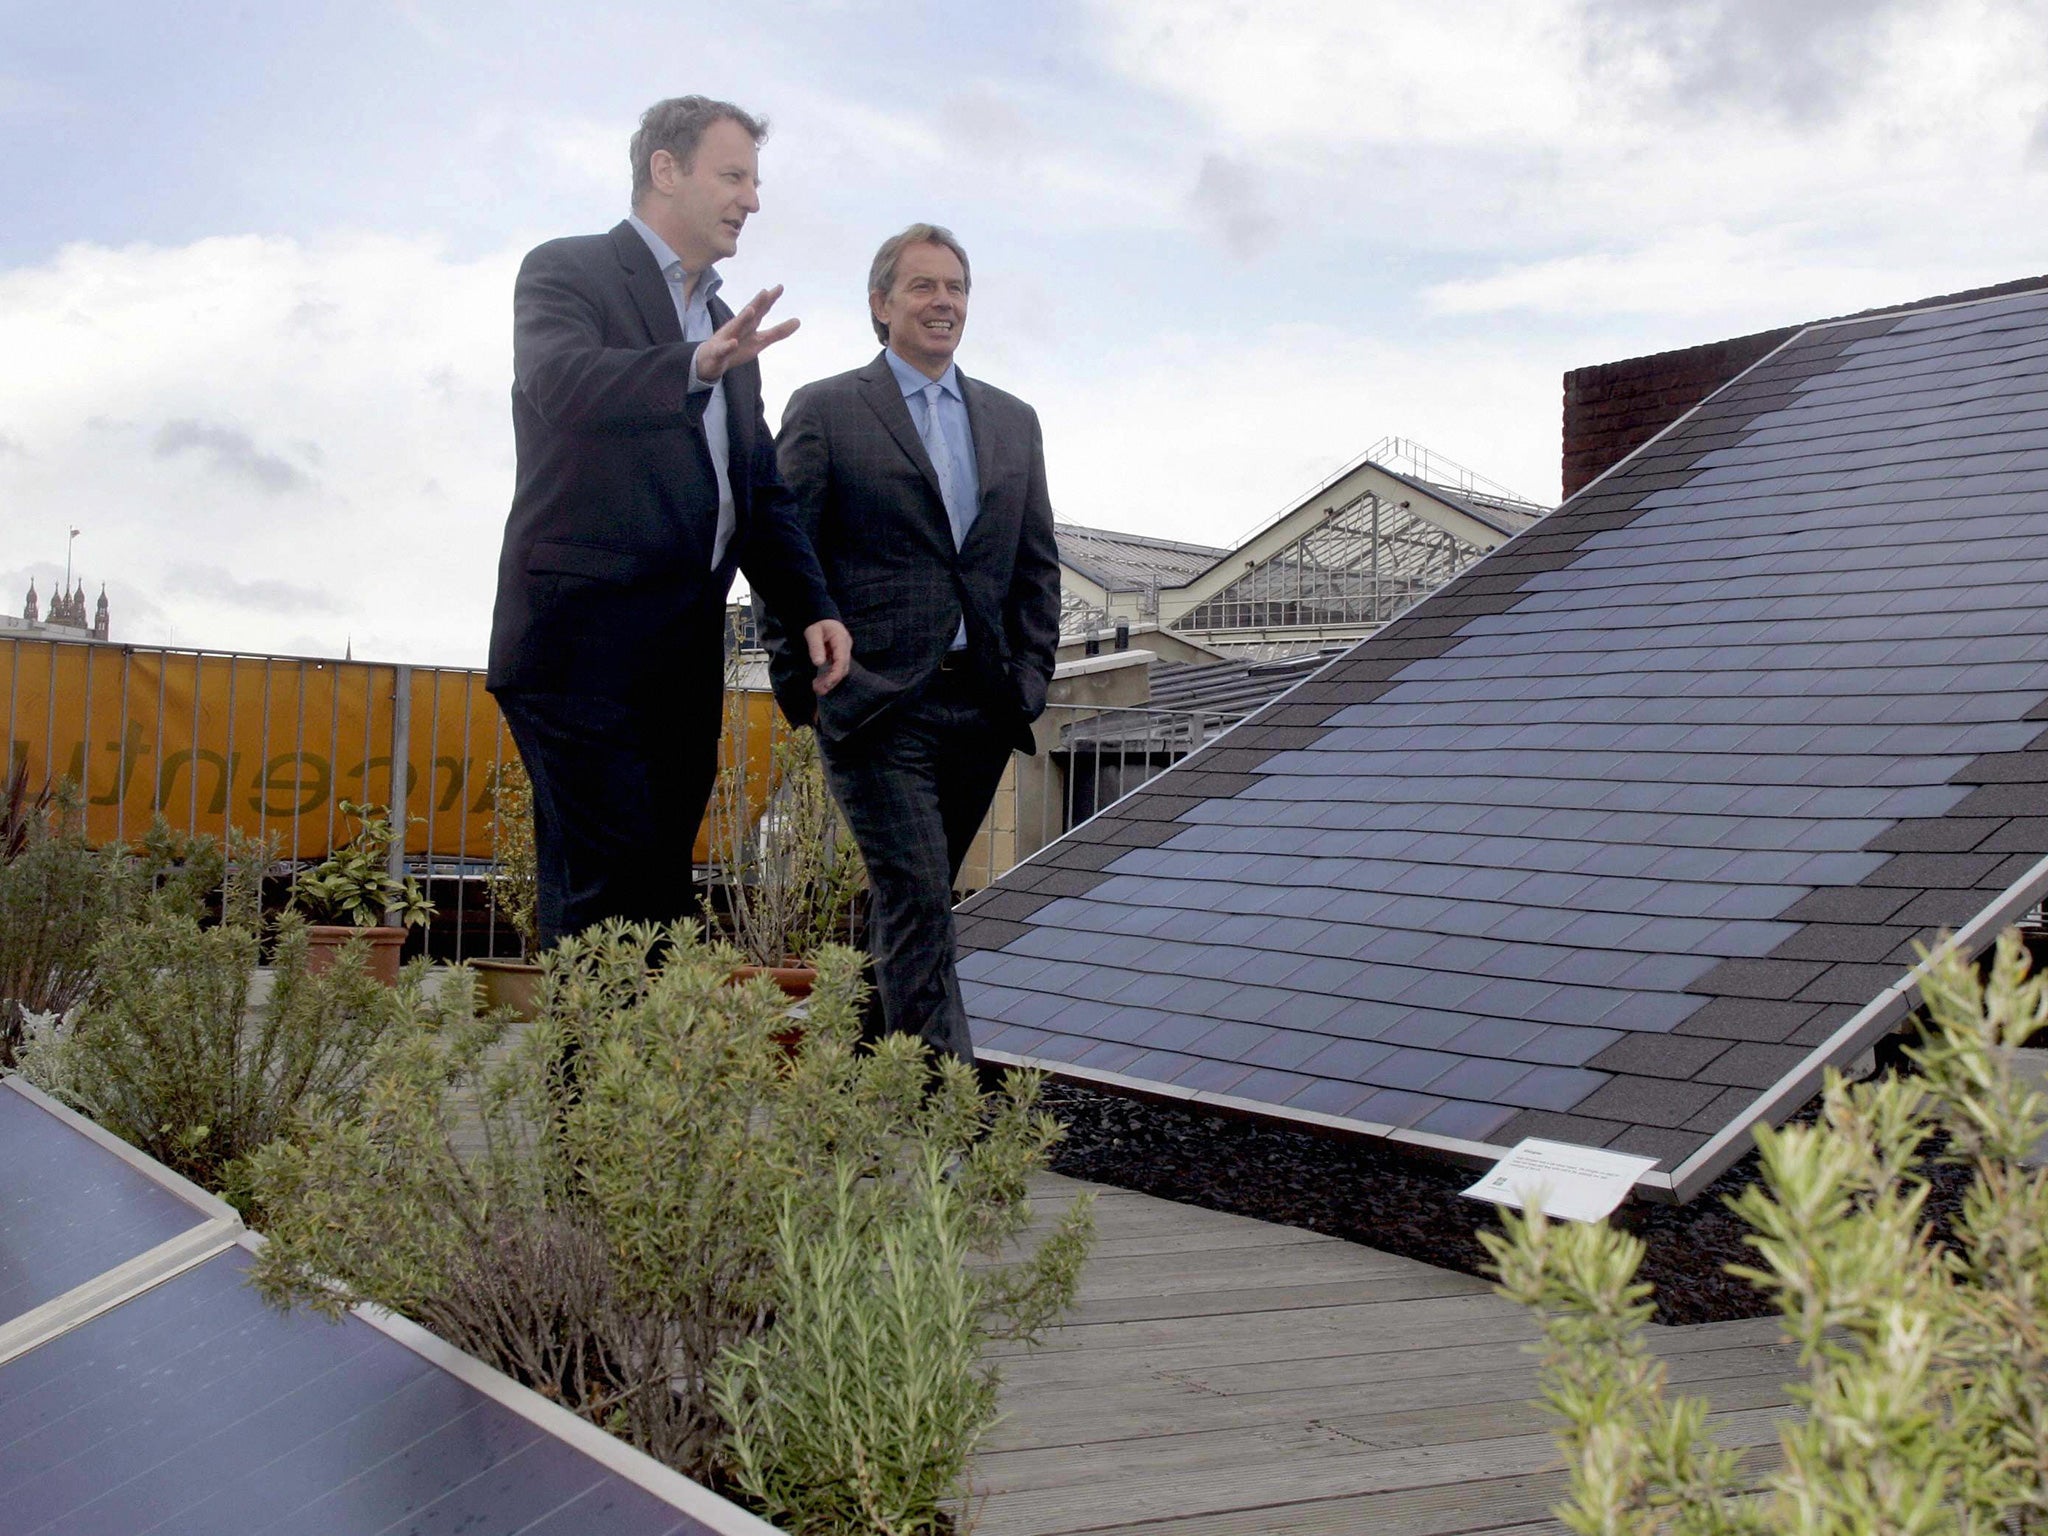 Ex-Prime Minister Tony Blair inspects solar roof panels at a time when the governent was more inclined to see them as a viable source of green energy